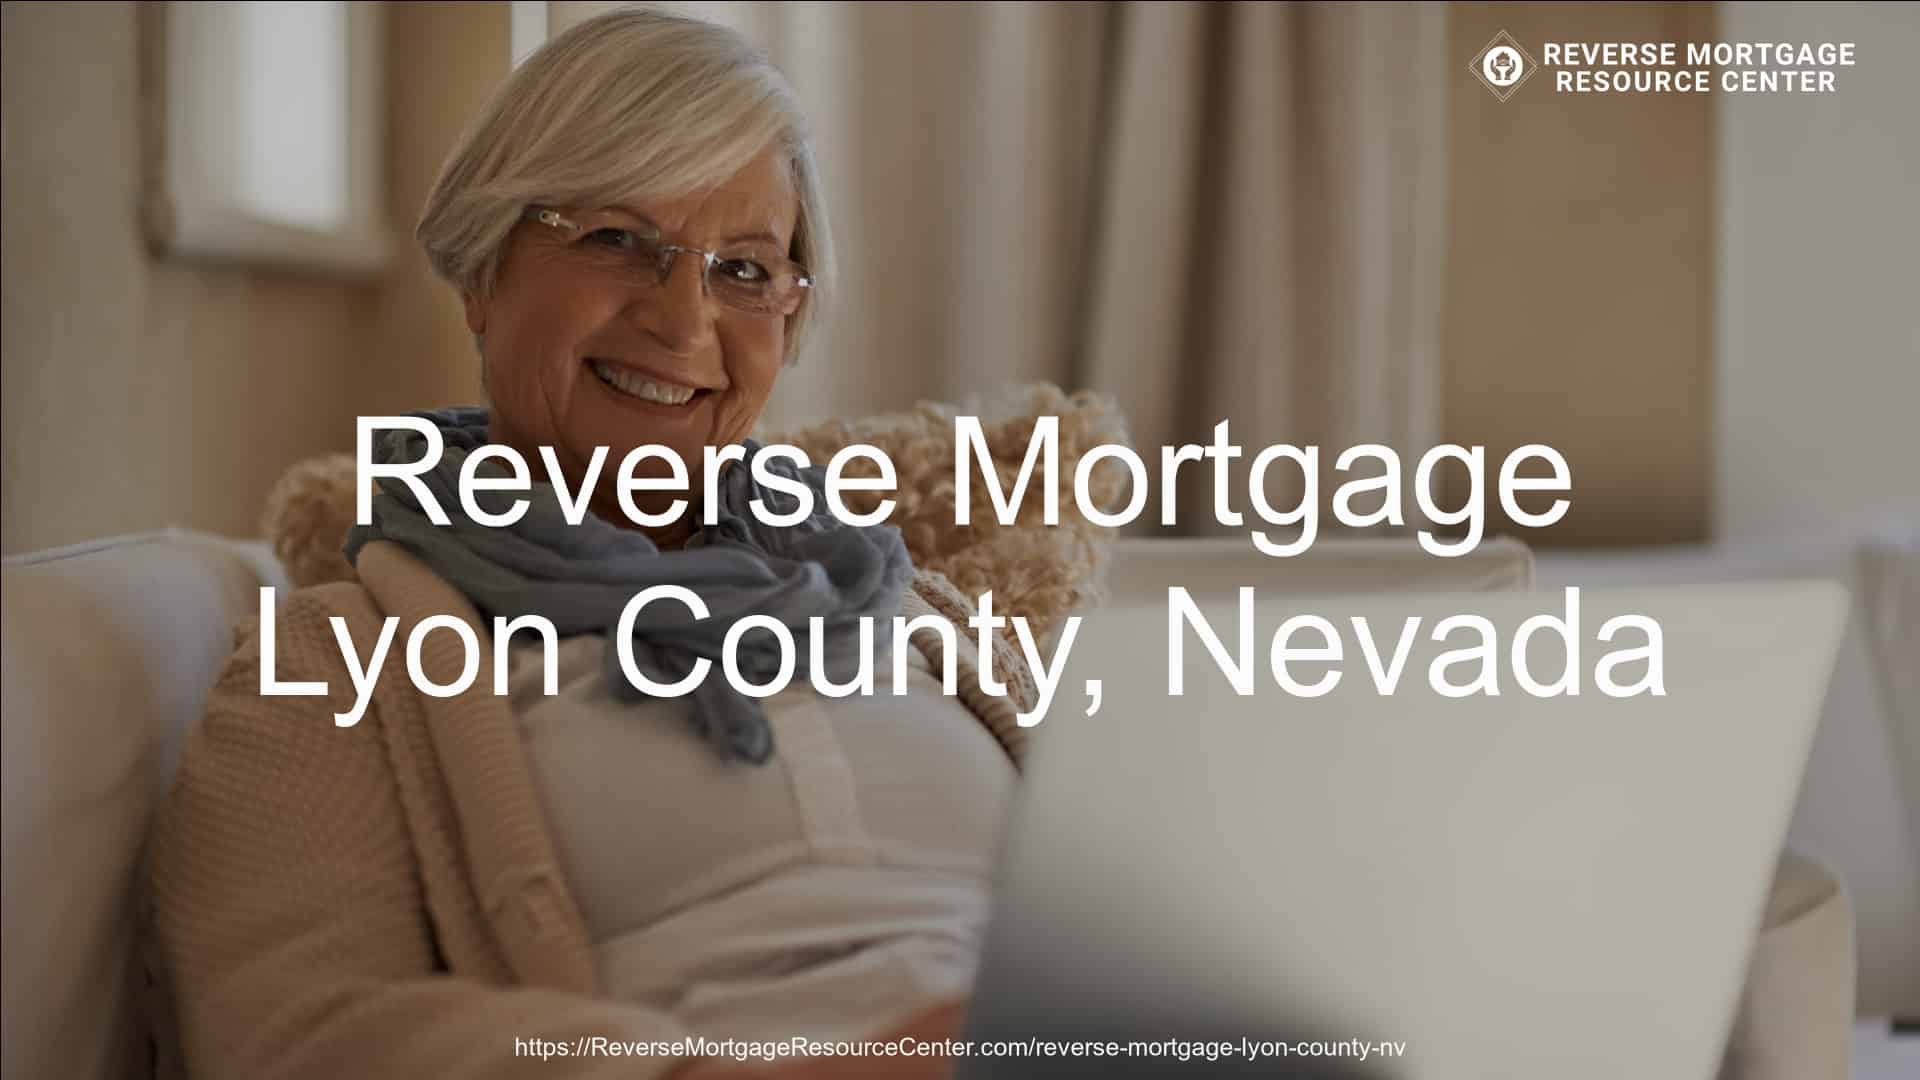 Reverse Mortgage Loans in Lyon County Nevada